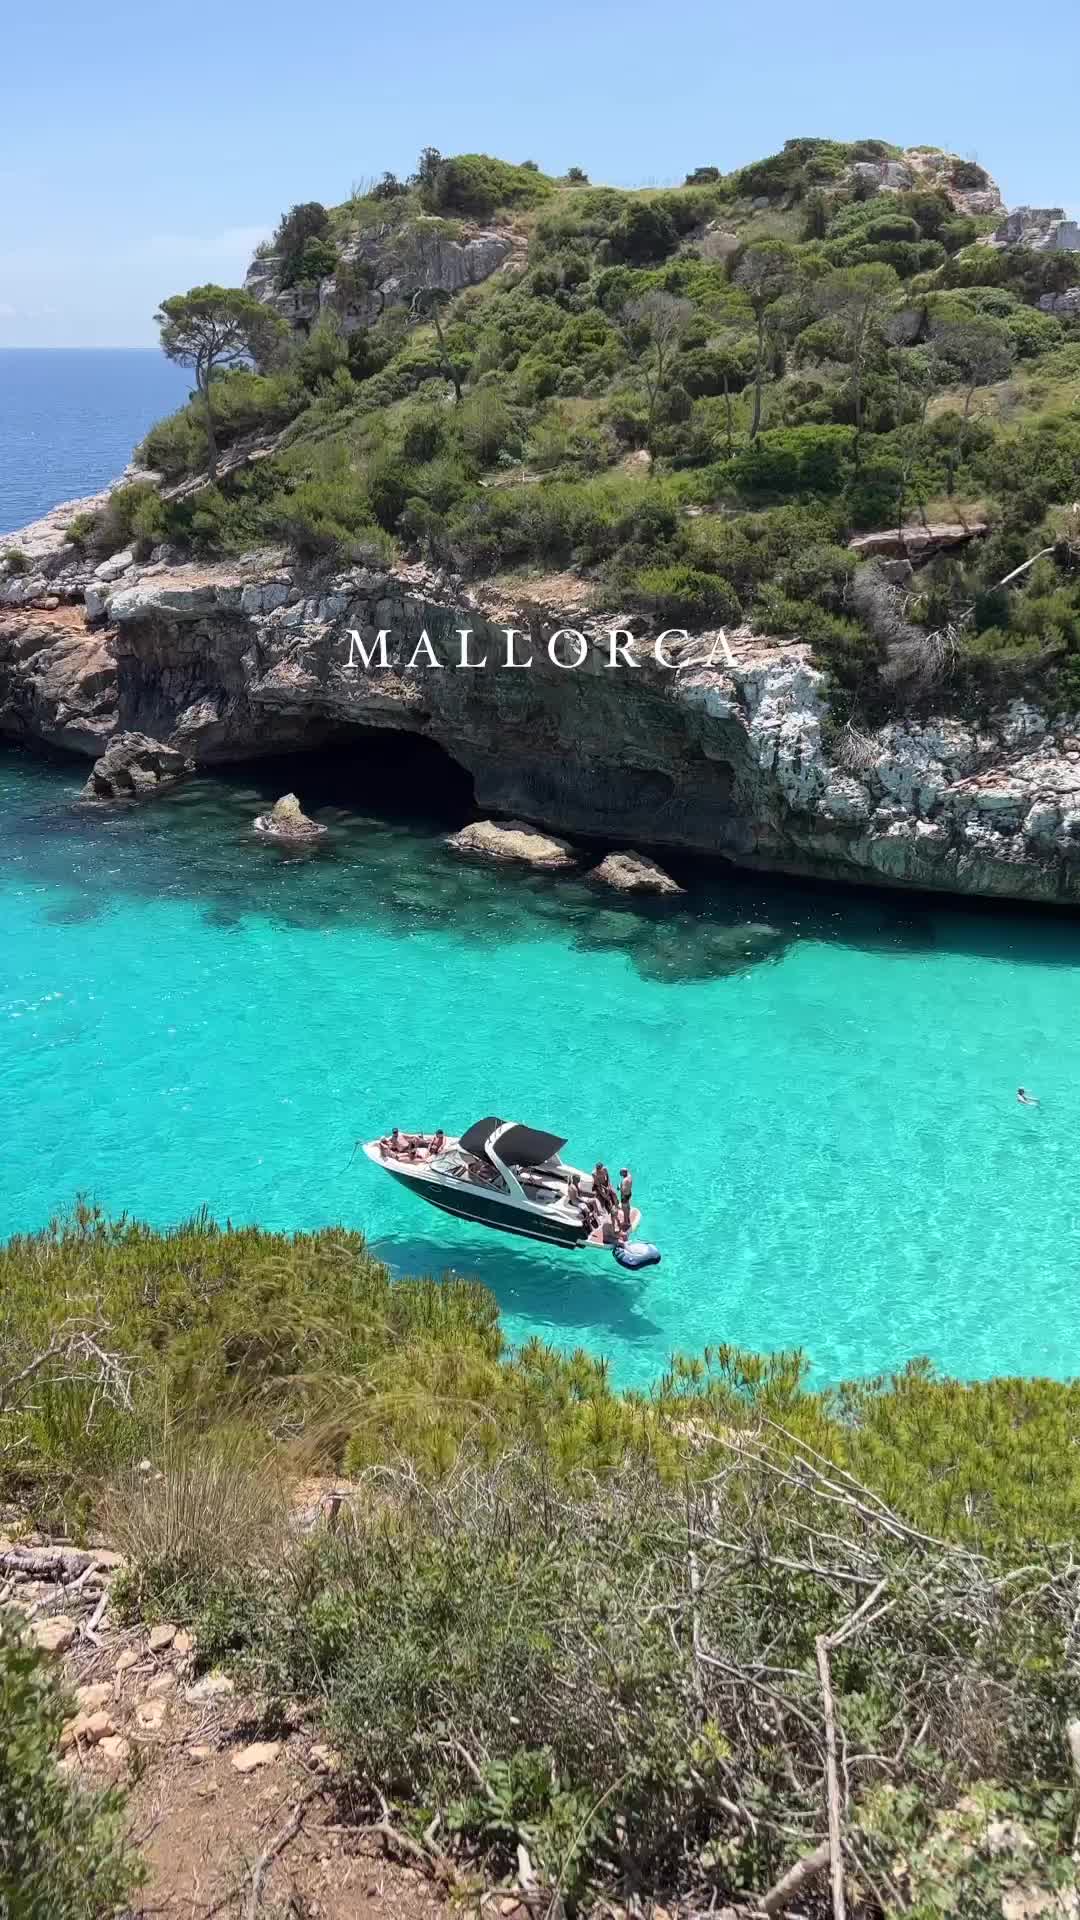 Just Mallorca vibes 🏝️🐐🪼📍👇🏼

👣 Leave nothing but footprints 

📍 Caló des Moro - One of the most clear blue water ever to be seen, has a twin cove that is all that mediterranean vibe (you can find it in my feed) 

Tip: Get here early as this place is REALLY popular, enjoy the views and absorb the best of mediterranean maybe catch a swim. Then I’d move onto either Cala Llombards/Es Trenc/Mondrago that’s nearby.(You find it in my feed)

📍 Palma de Mallorca - The ”Capital” of Mallorca, this is just a must visit to just stroll around the old town of Palma, have a look at all the fascinating architecture and catch good food.

📍 Cala Llombards - My favorite place to be in Mallorca. 

📍 Banyalbufar - One of the most picturesque villages found in Mallorca which also has a unique cala connected to it.

🐐 GOAT(Greatest of all time) island 

📍Torrent de Pareis - A must visit location you will never forget.

🐬 ALSO… Please be kind and don’t litter! And don’t forget to save this reel for your next trip & feel free to follow for more beautiful locations 

🎥 Every reel I create with clips is a template for you to use and fill the frames with to create your own awesome reel! 

#mallorca #mallorcaisland #mallorcagram #illesbalears #baleares #findyourspain #mediterranean #spain #majorca #mallorcareels #travel #summervibes